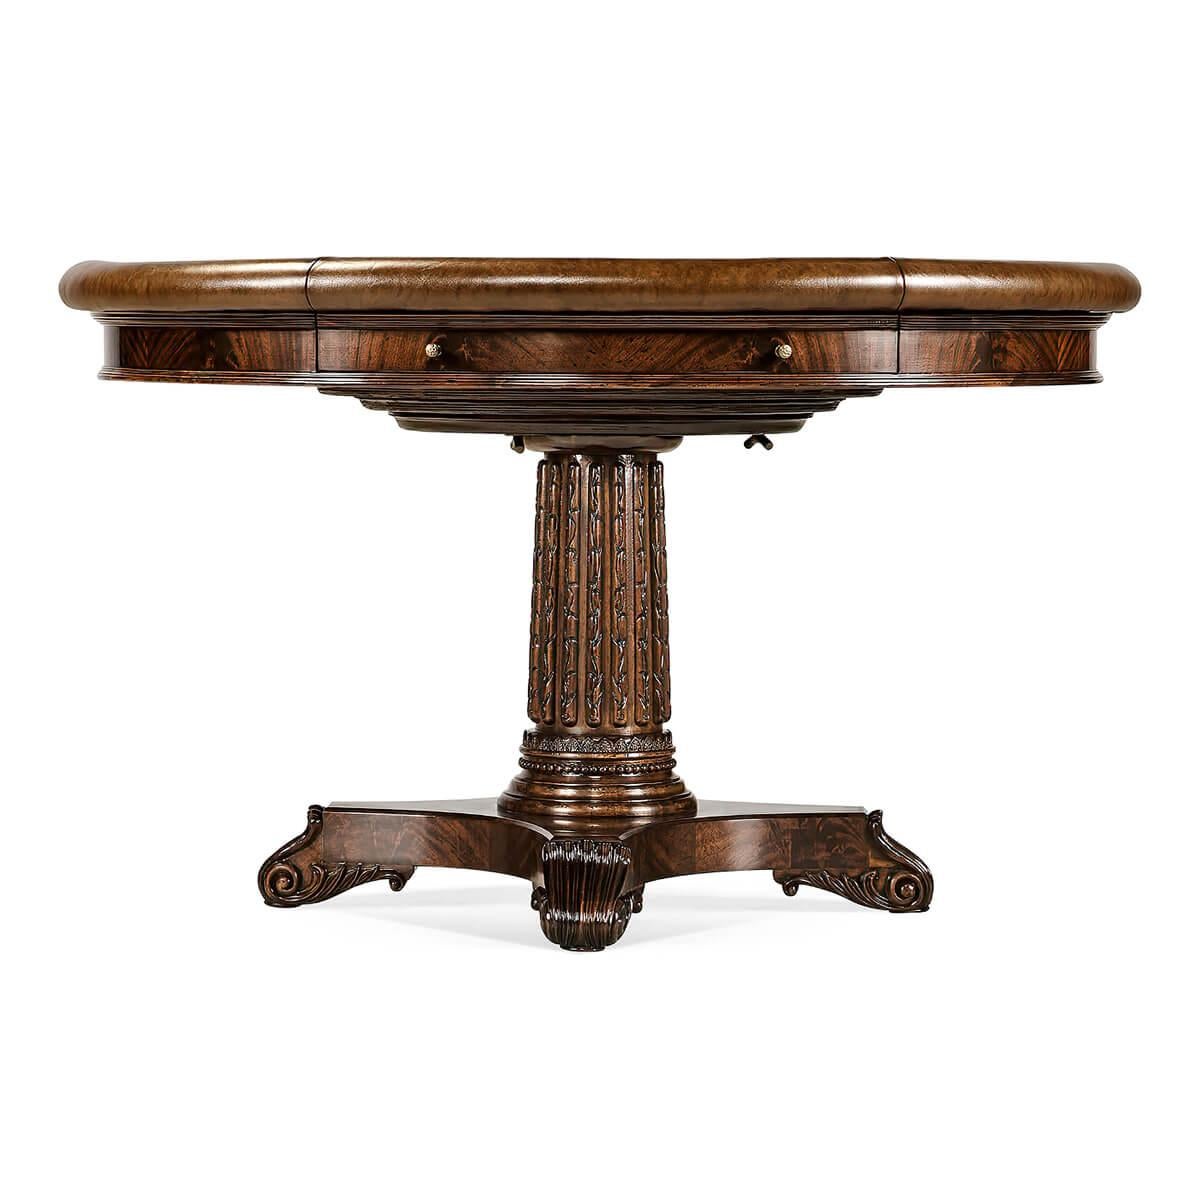 A fine English Regency style professional style Poker table with crotch mahogany sides, an antique brown leather top, leather the perfect tooling of various currency symbols, with handcrafted brass cup holders and chip racks. With a chip rack drawer